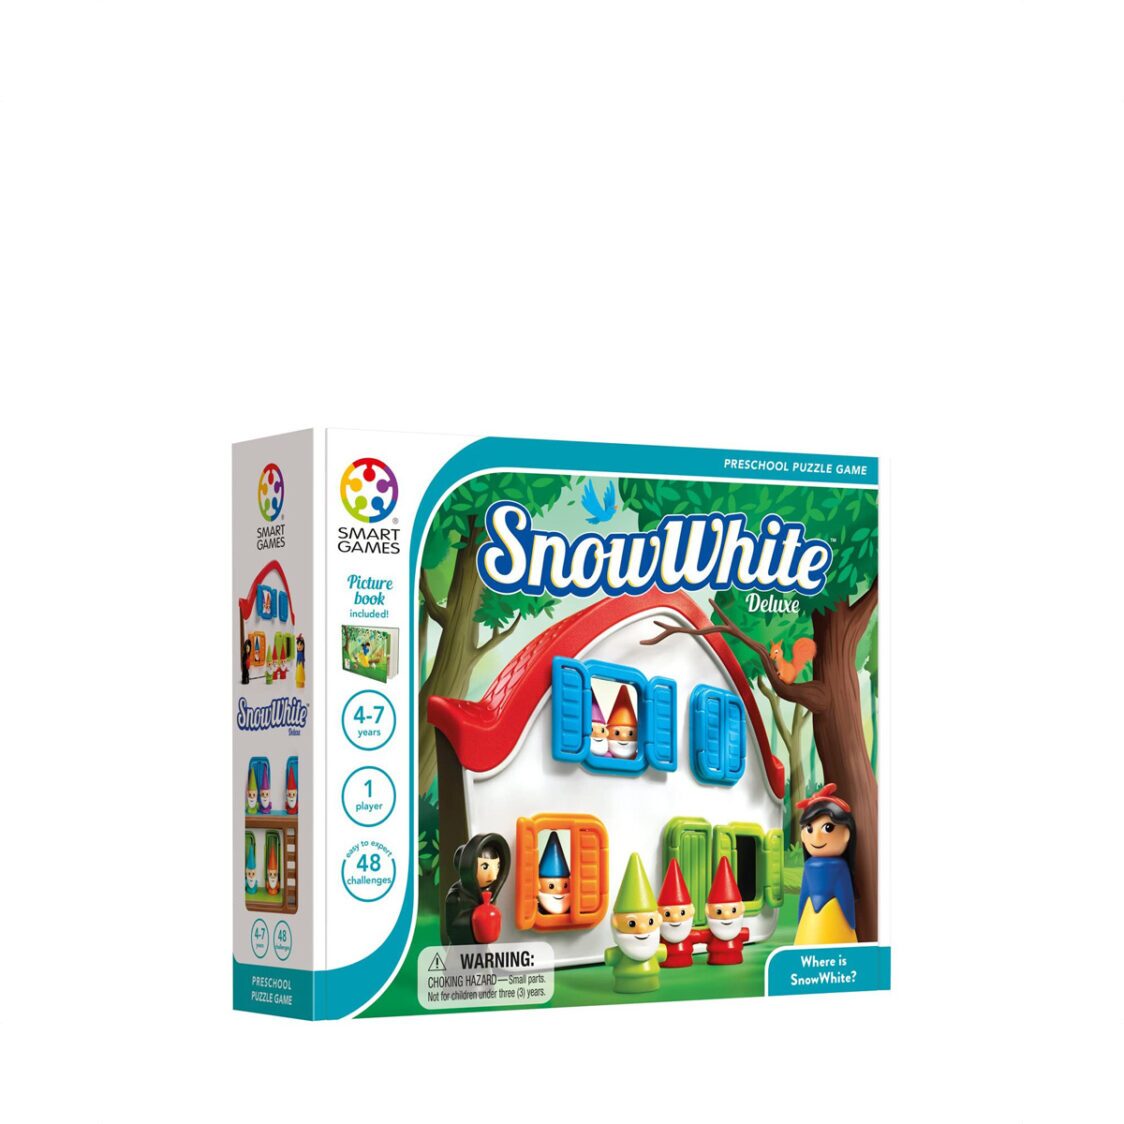 Smart Games Snow White - Deluxe